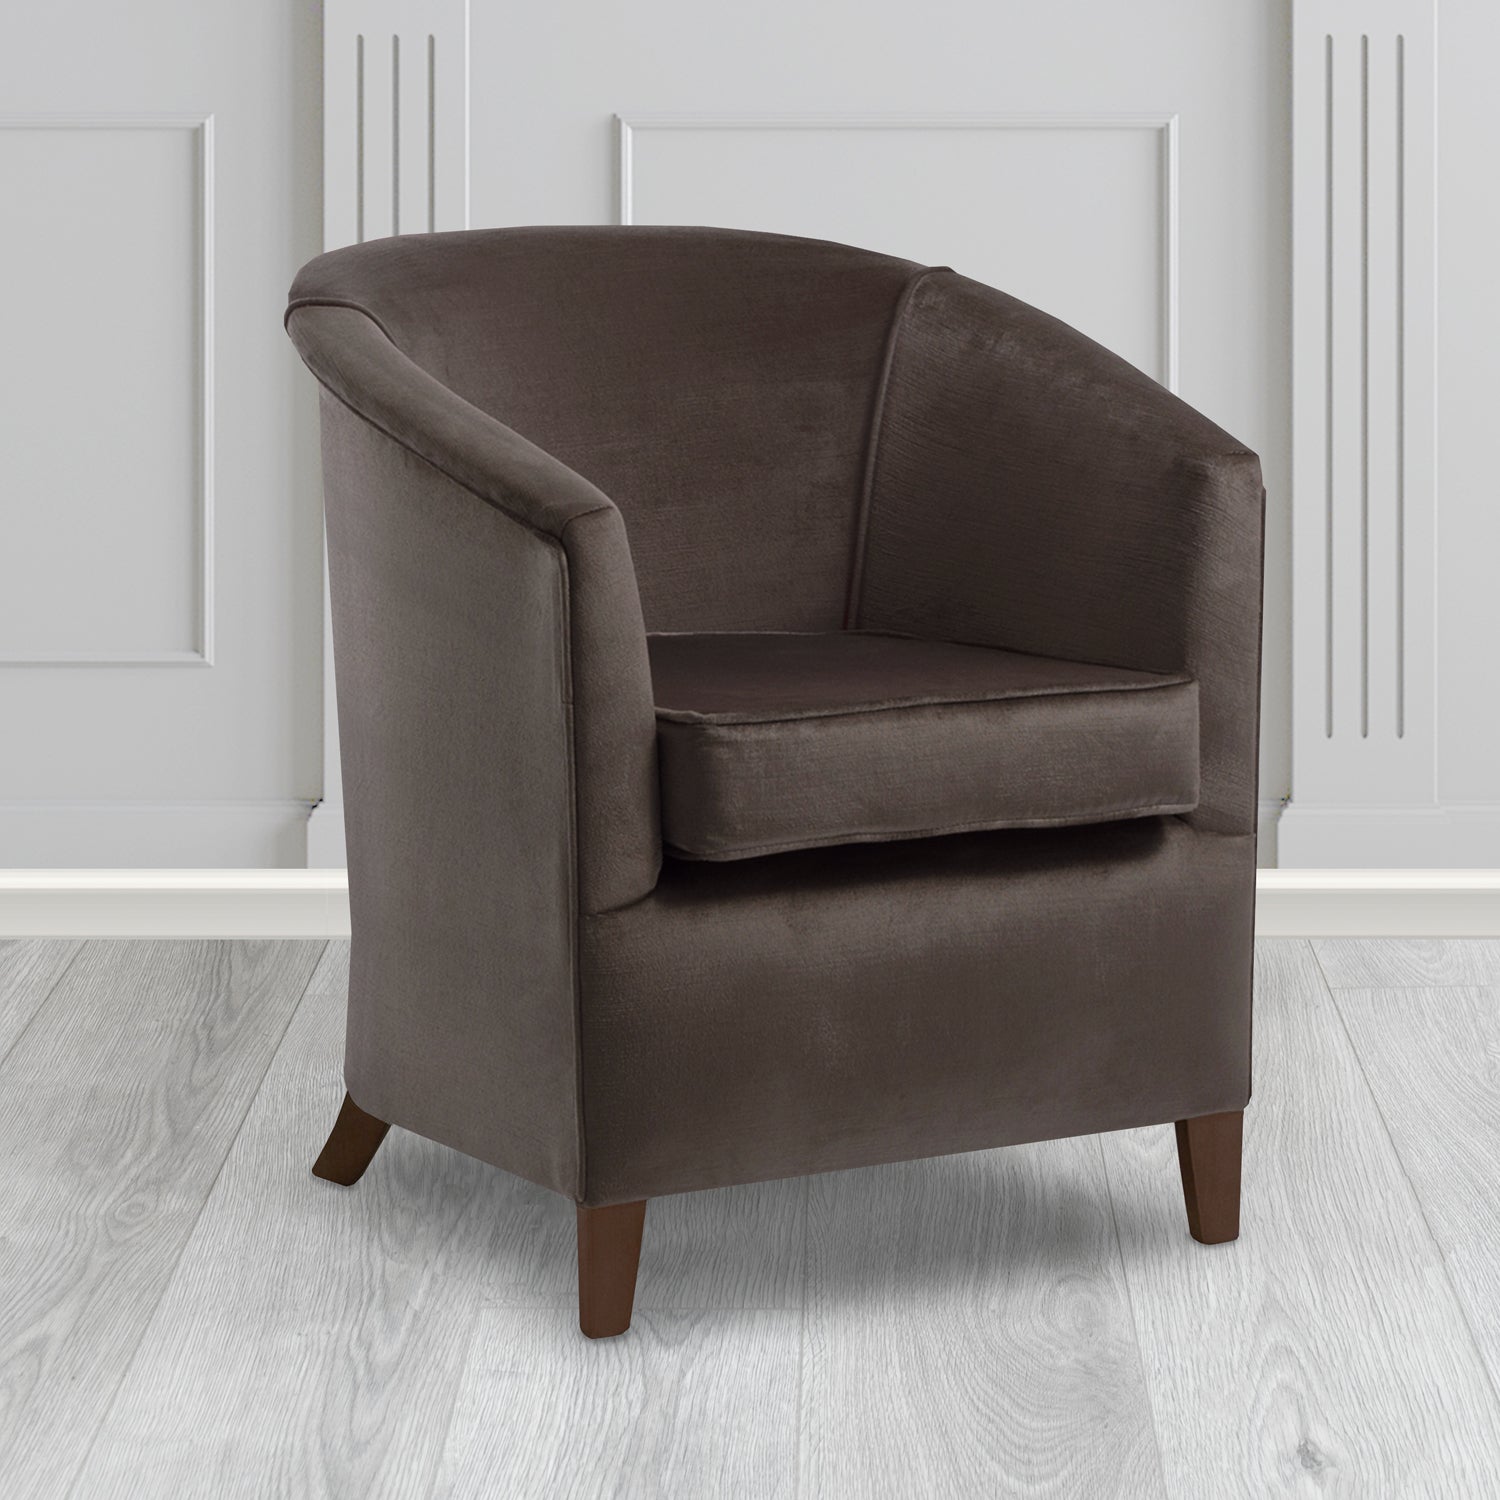 Jasmine Tub Chair in Noble 903 Charcoal Crib 5 Velvet Fabric - Water Resistant - The Tub Chair Shop